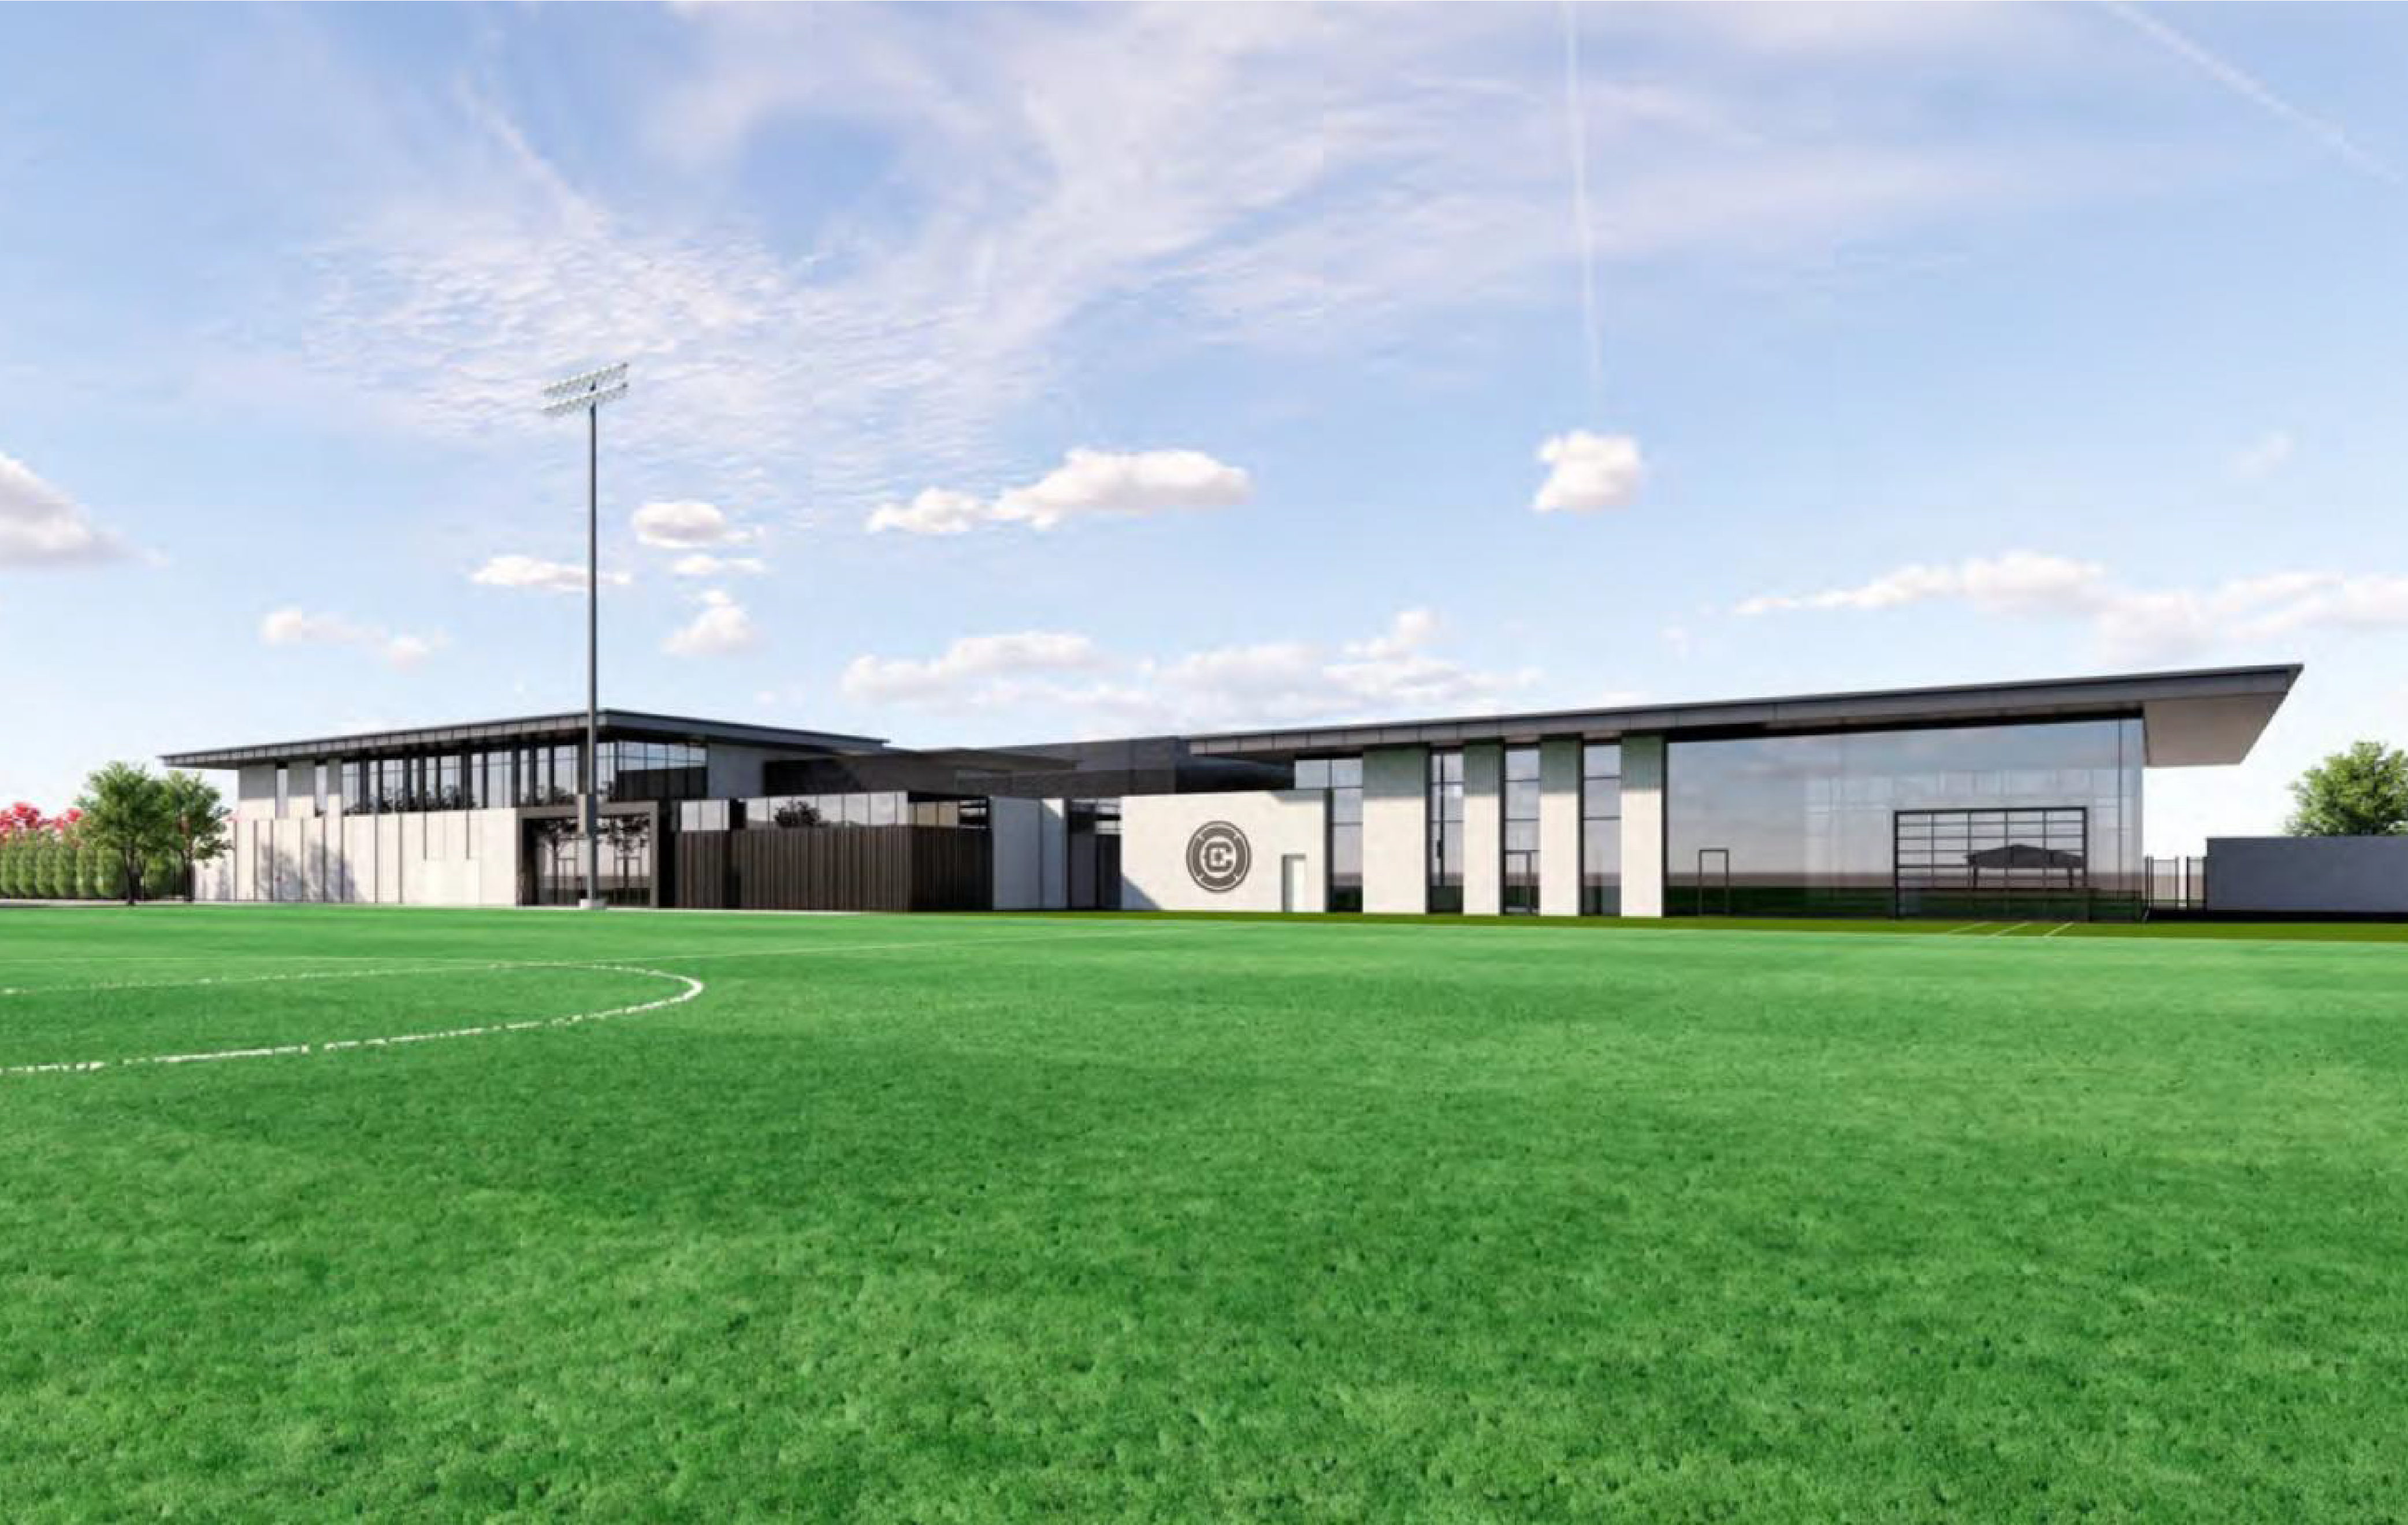 https://chicagoyimby.com/wp-content/uploads/2022/08/Chicago-Fire-Facility-01.png